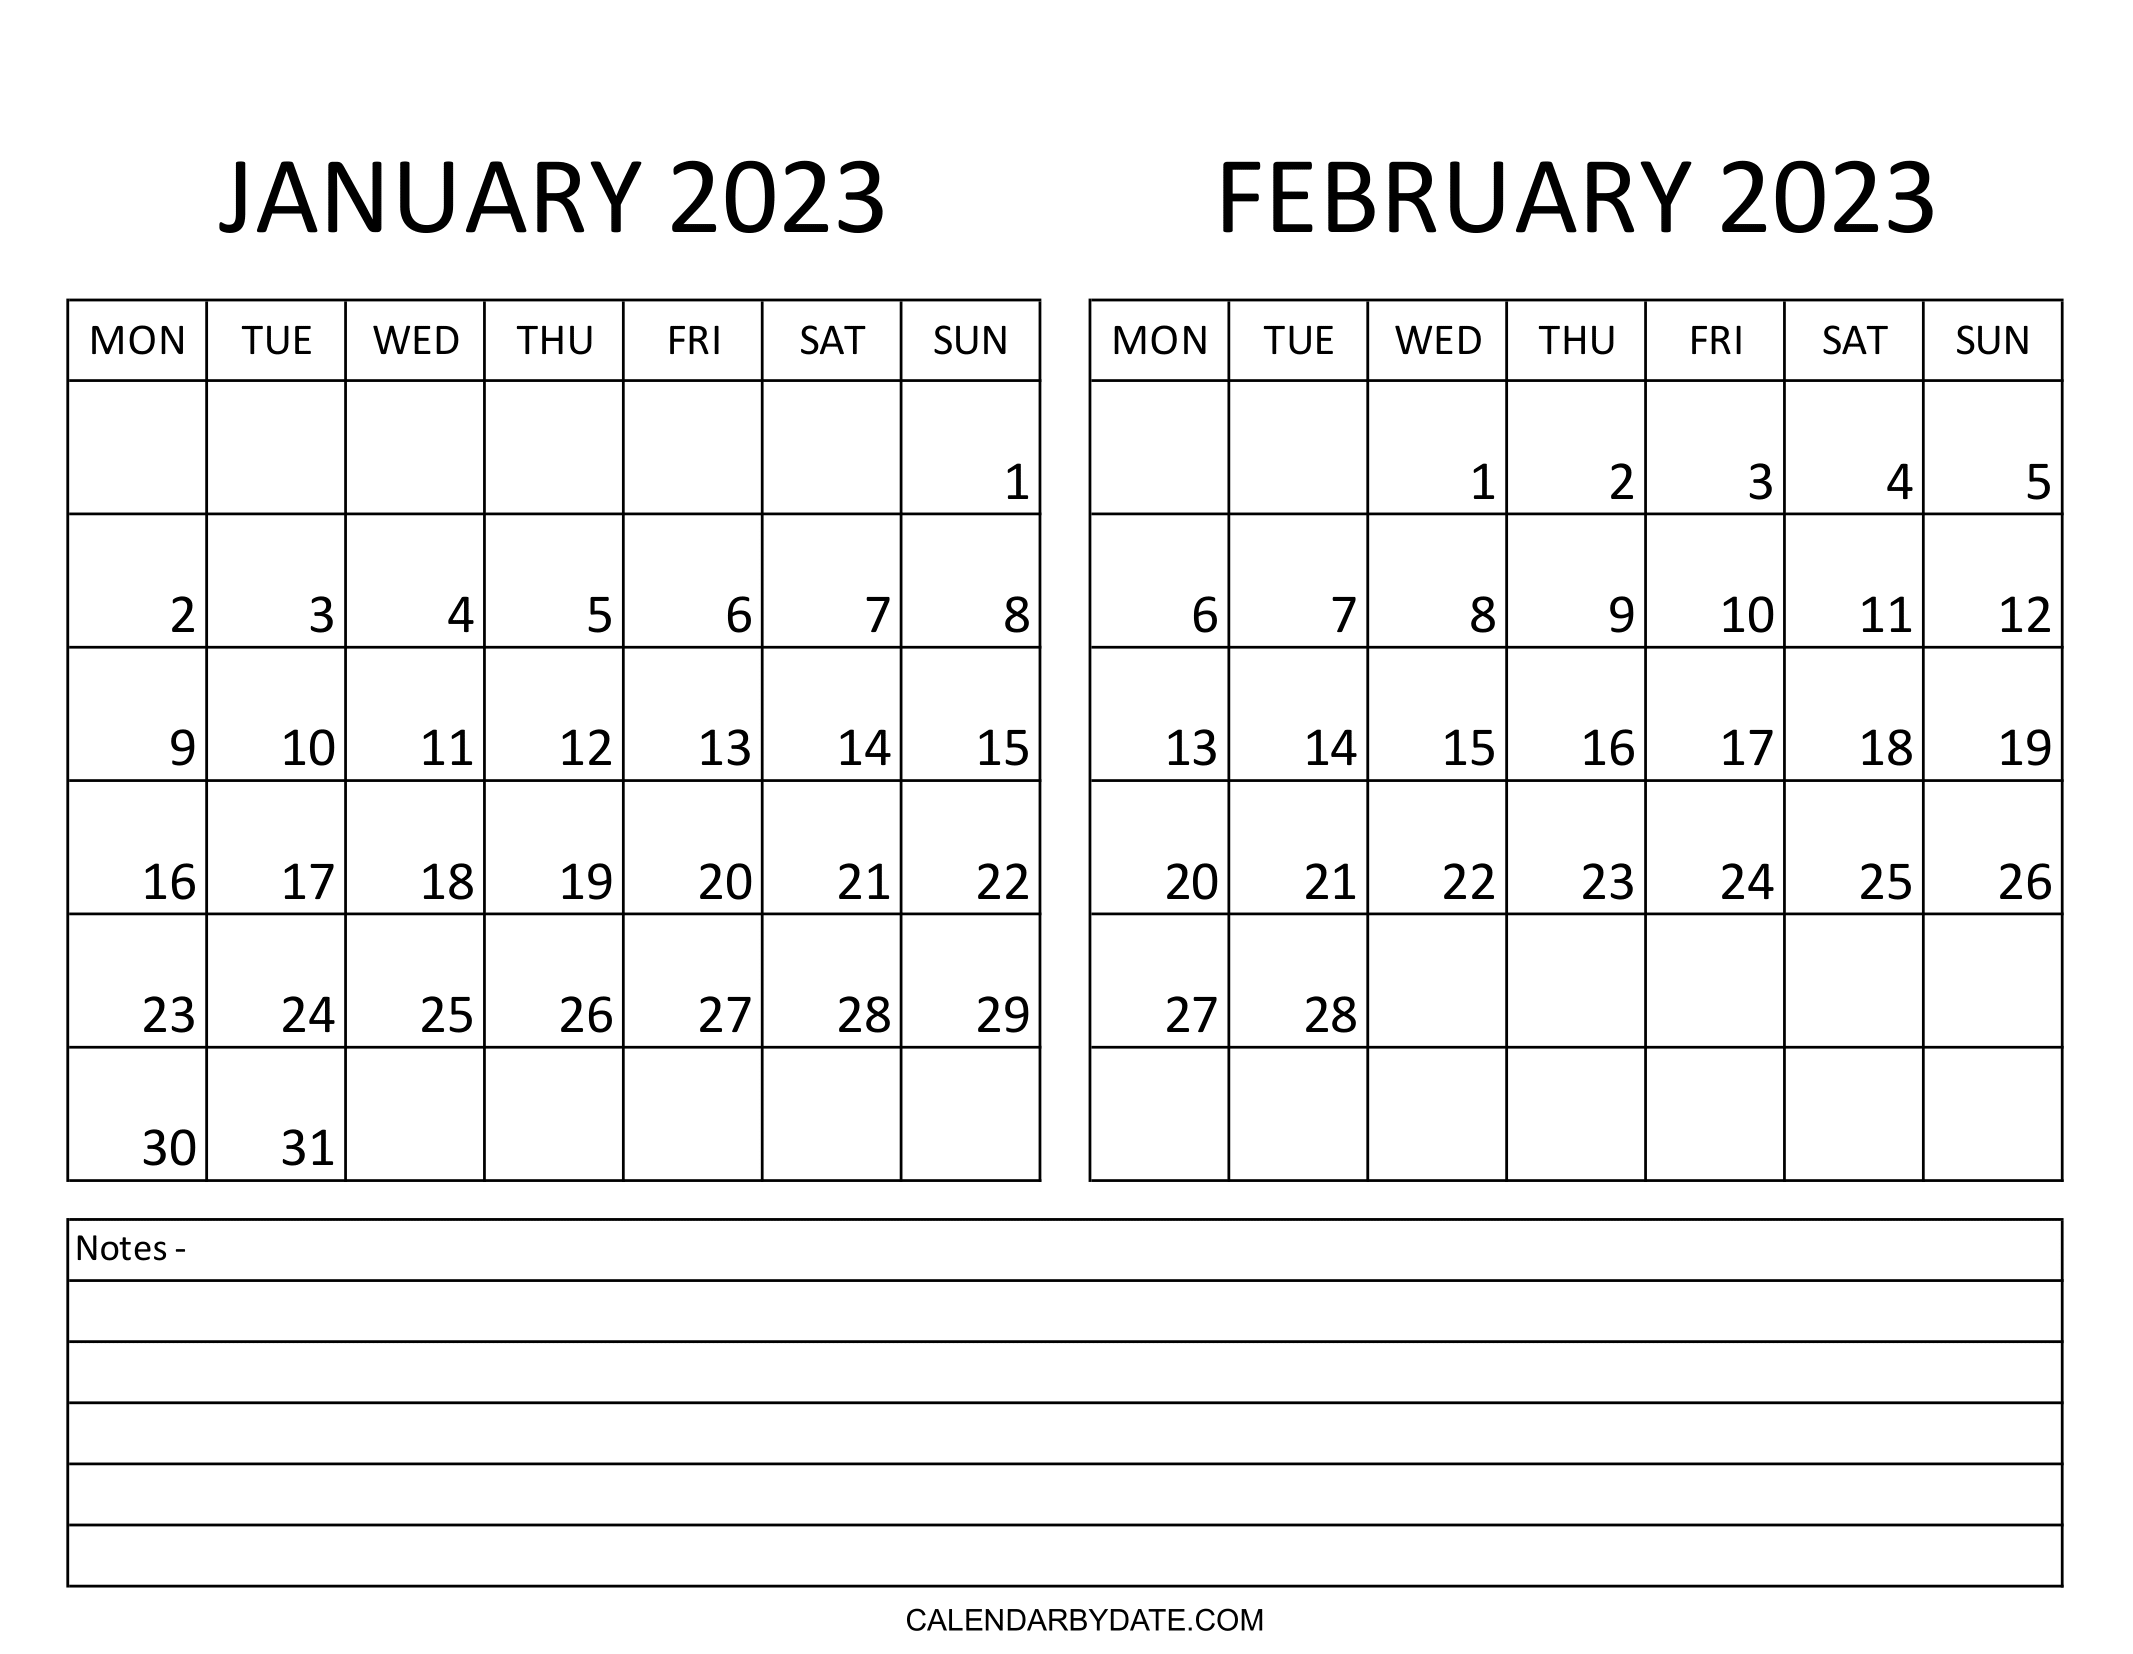 The calendar for January and February 2023 has a landscape layout with a section at the bottom for notes that lists the two months' most important events, activities, and priorities.